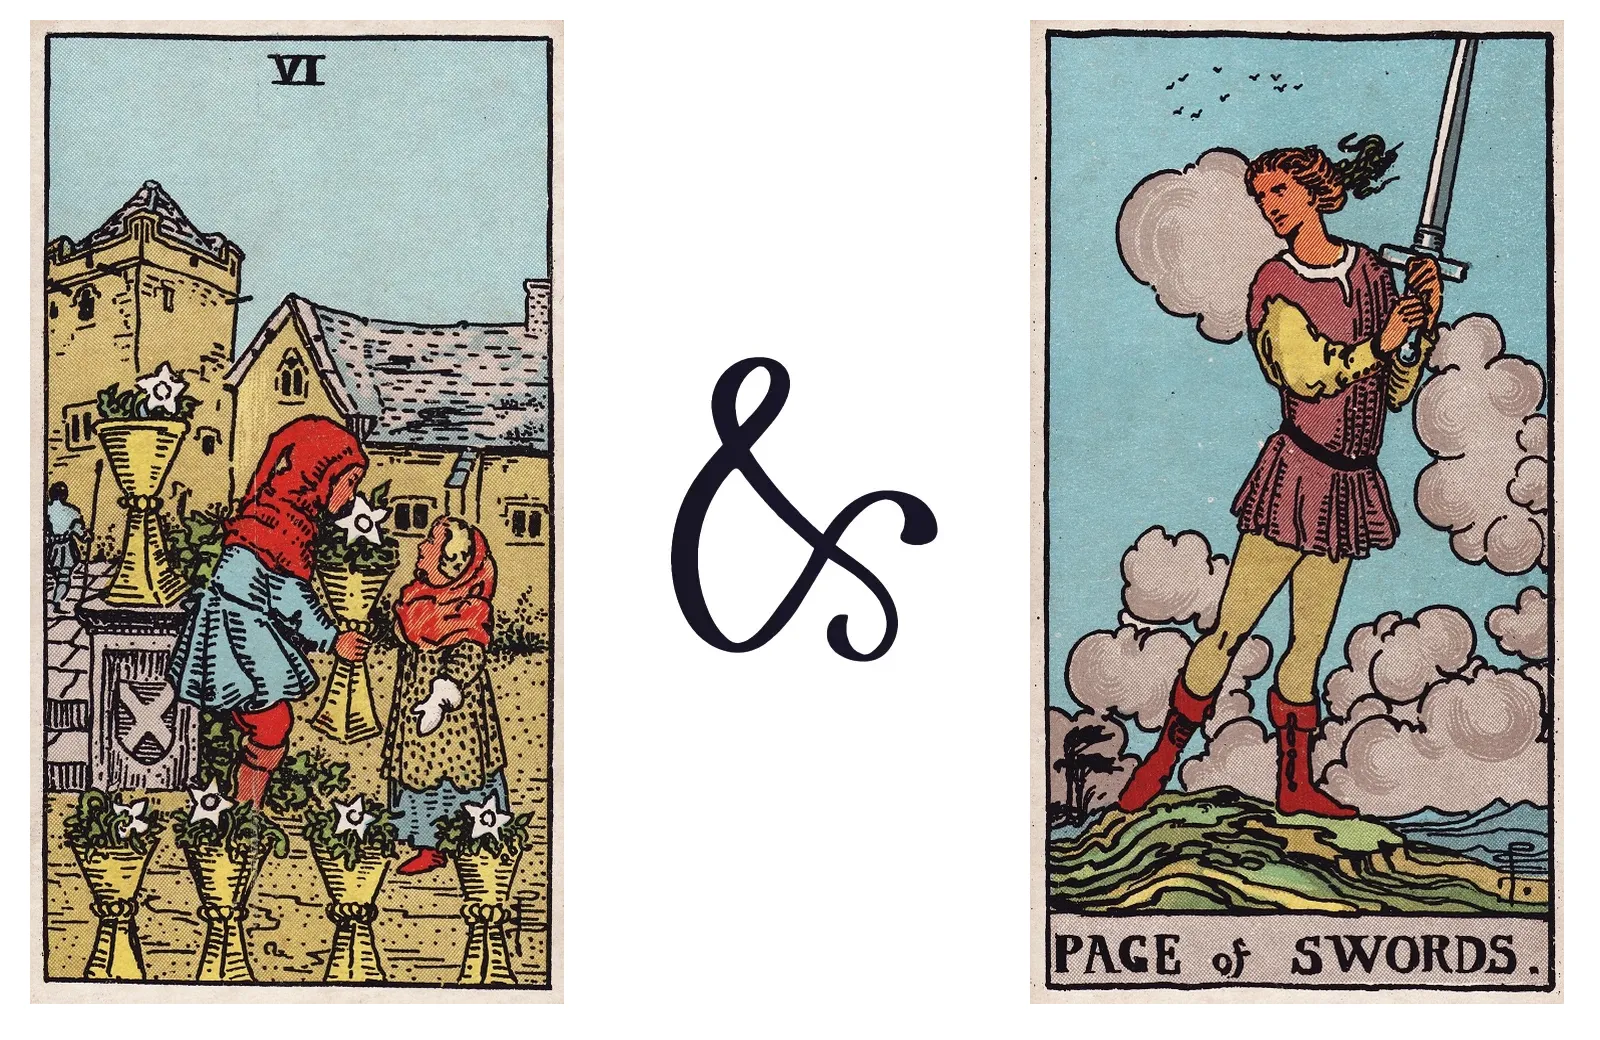 Six of Cups and Page of Swords